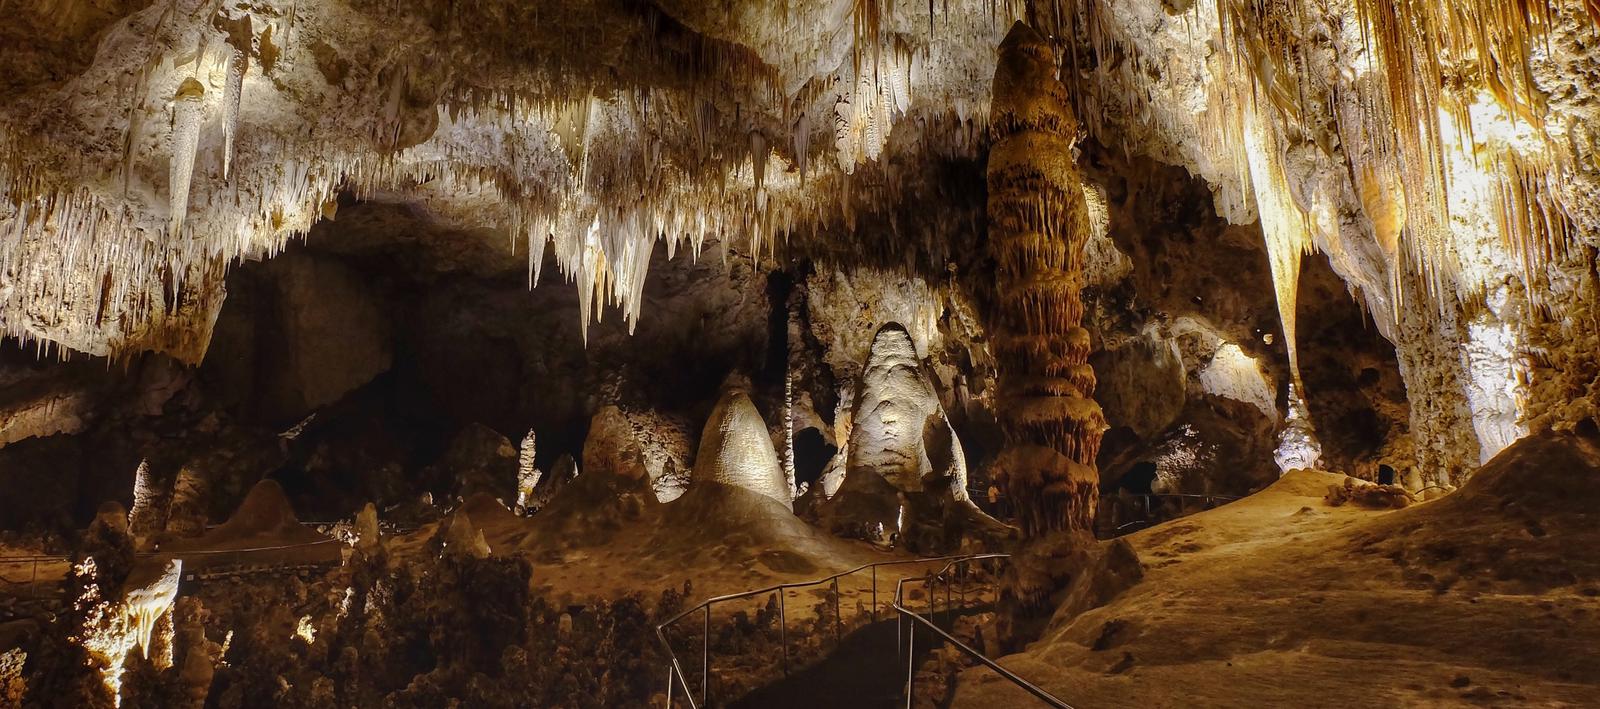 Photo of stalactites and stalagmites in the Big Room.